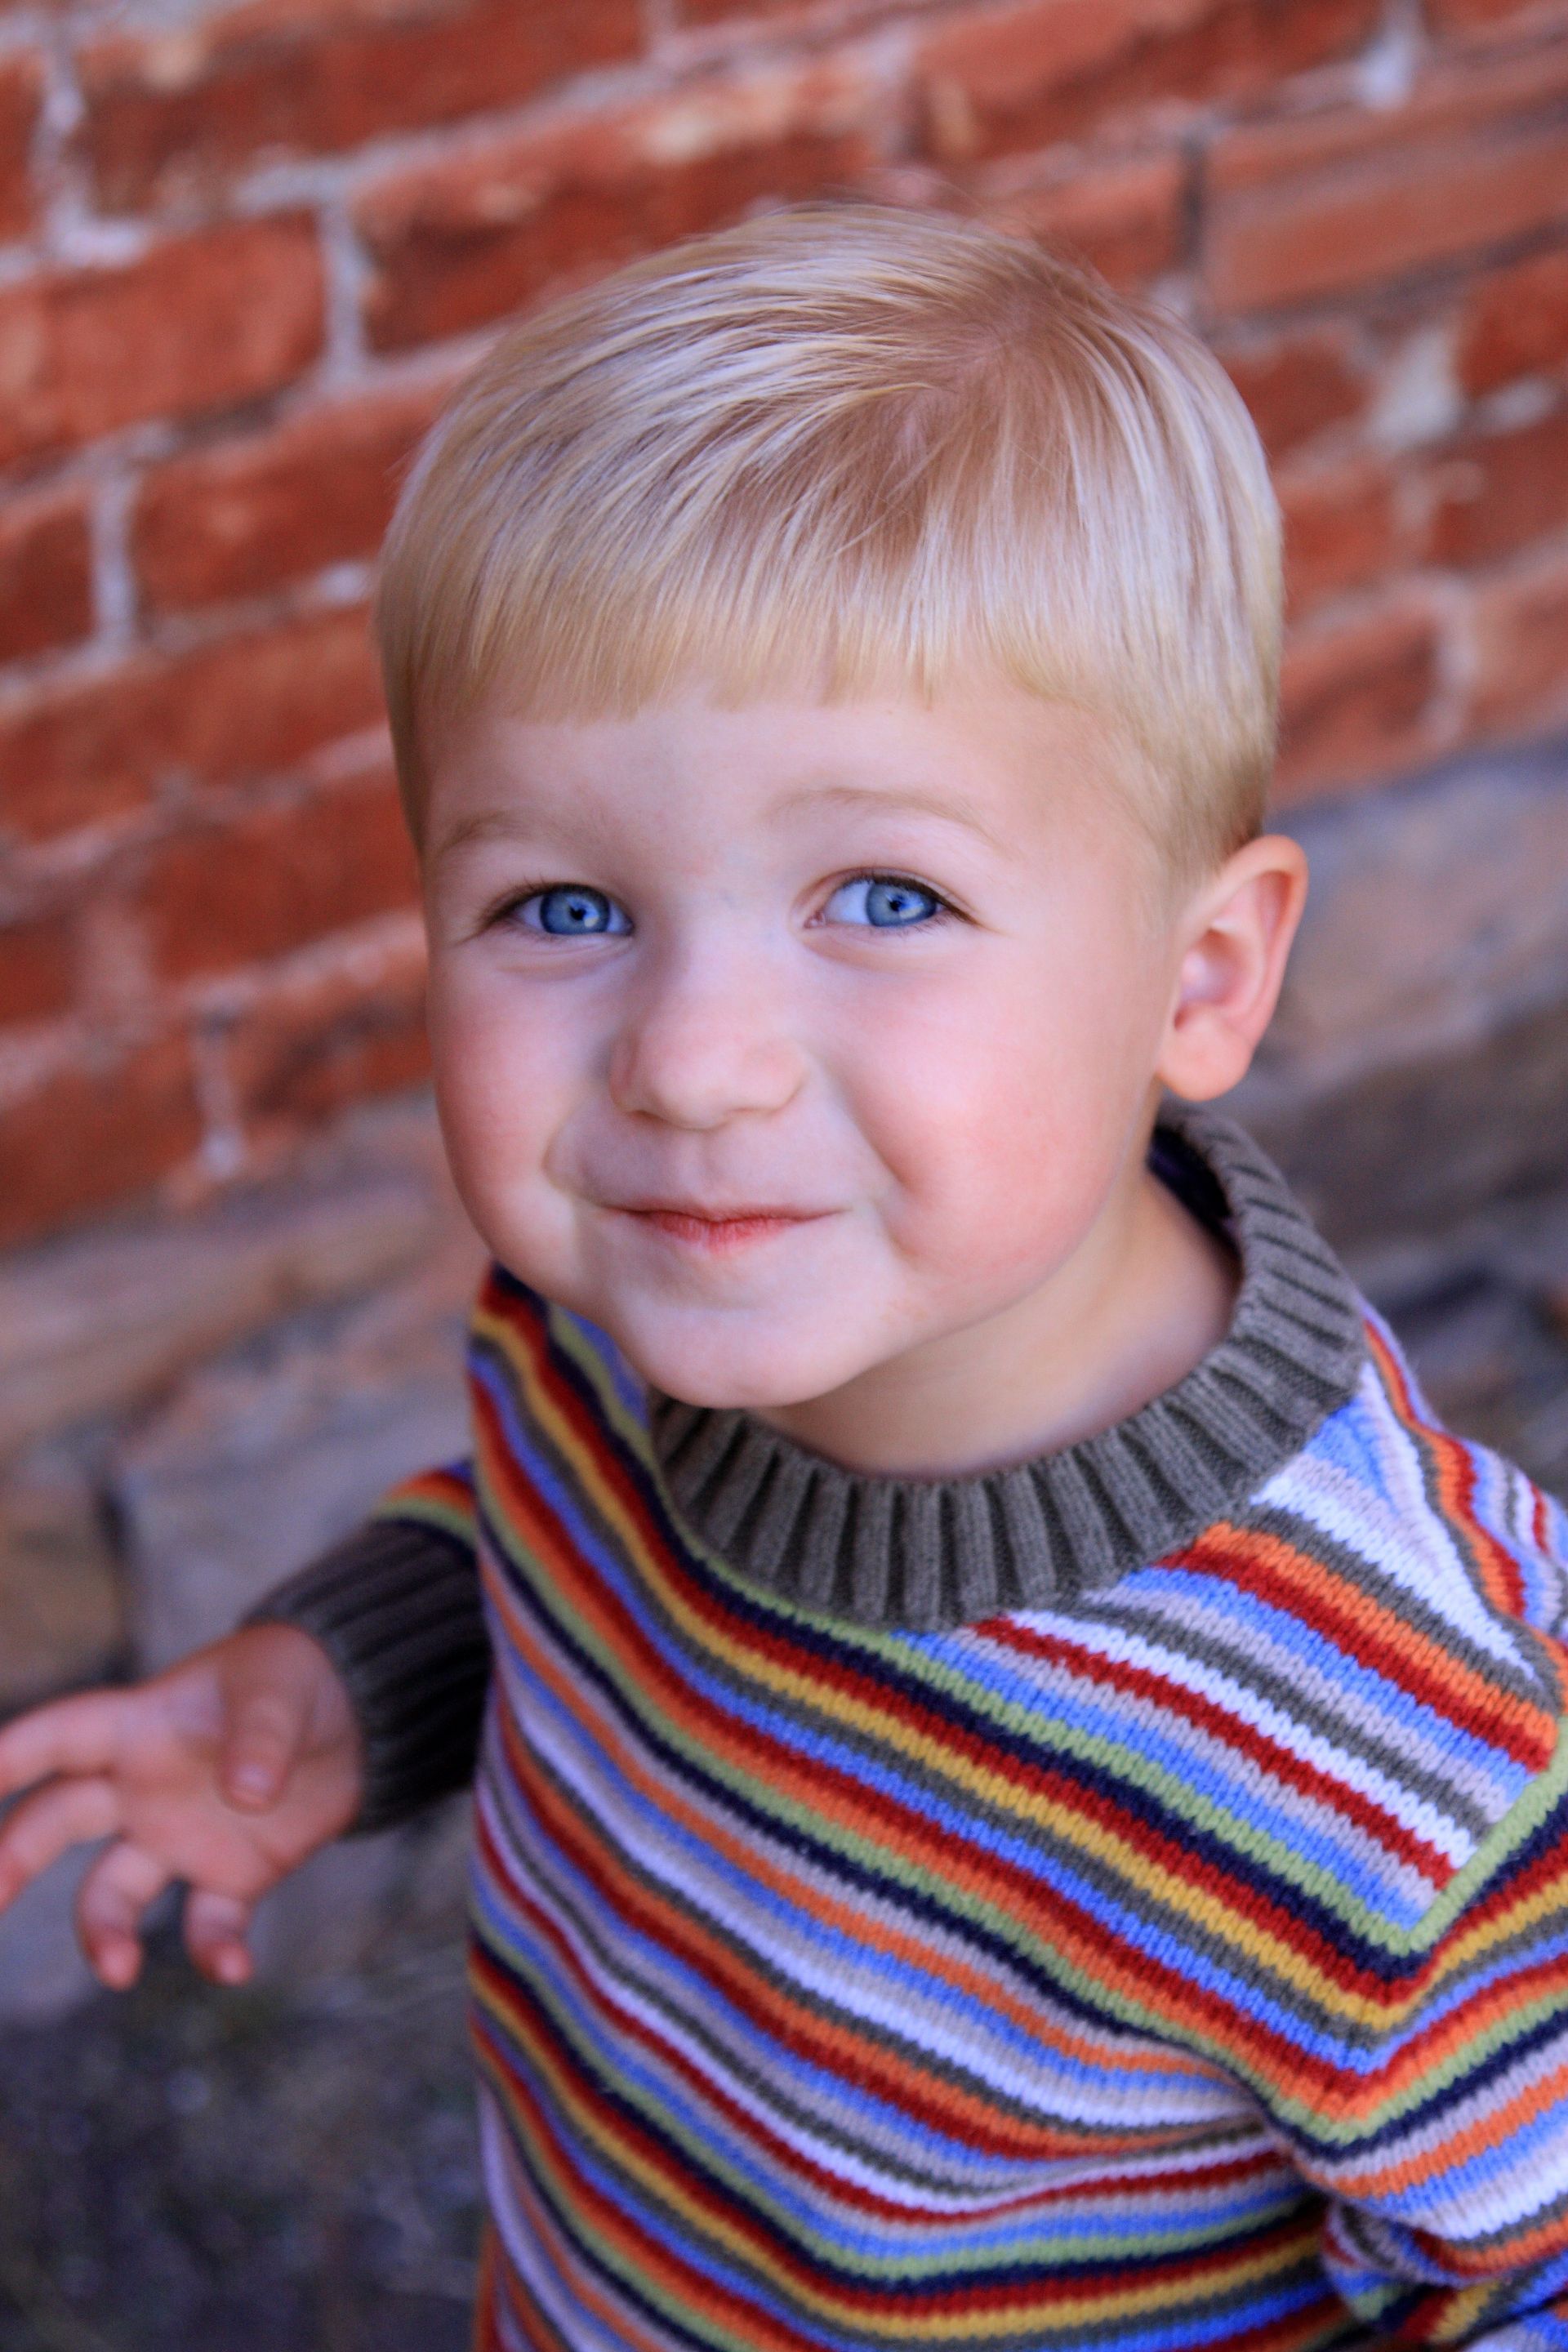 A portrait of a toddler boy wearing a striped sweater.